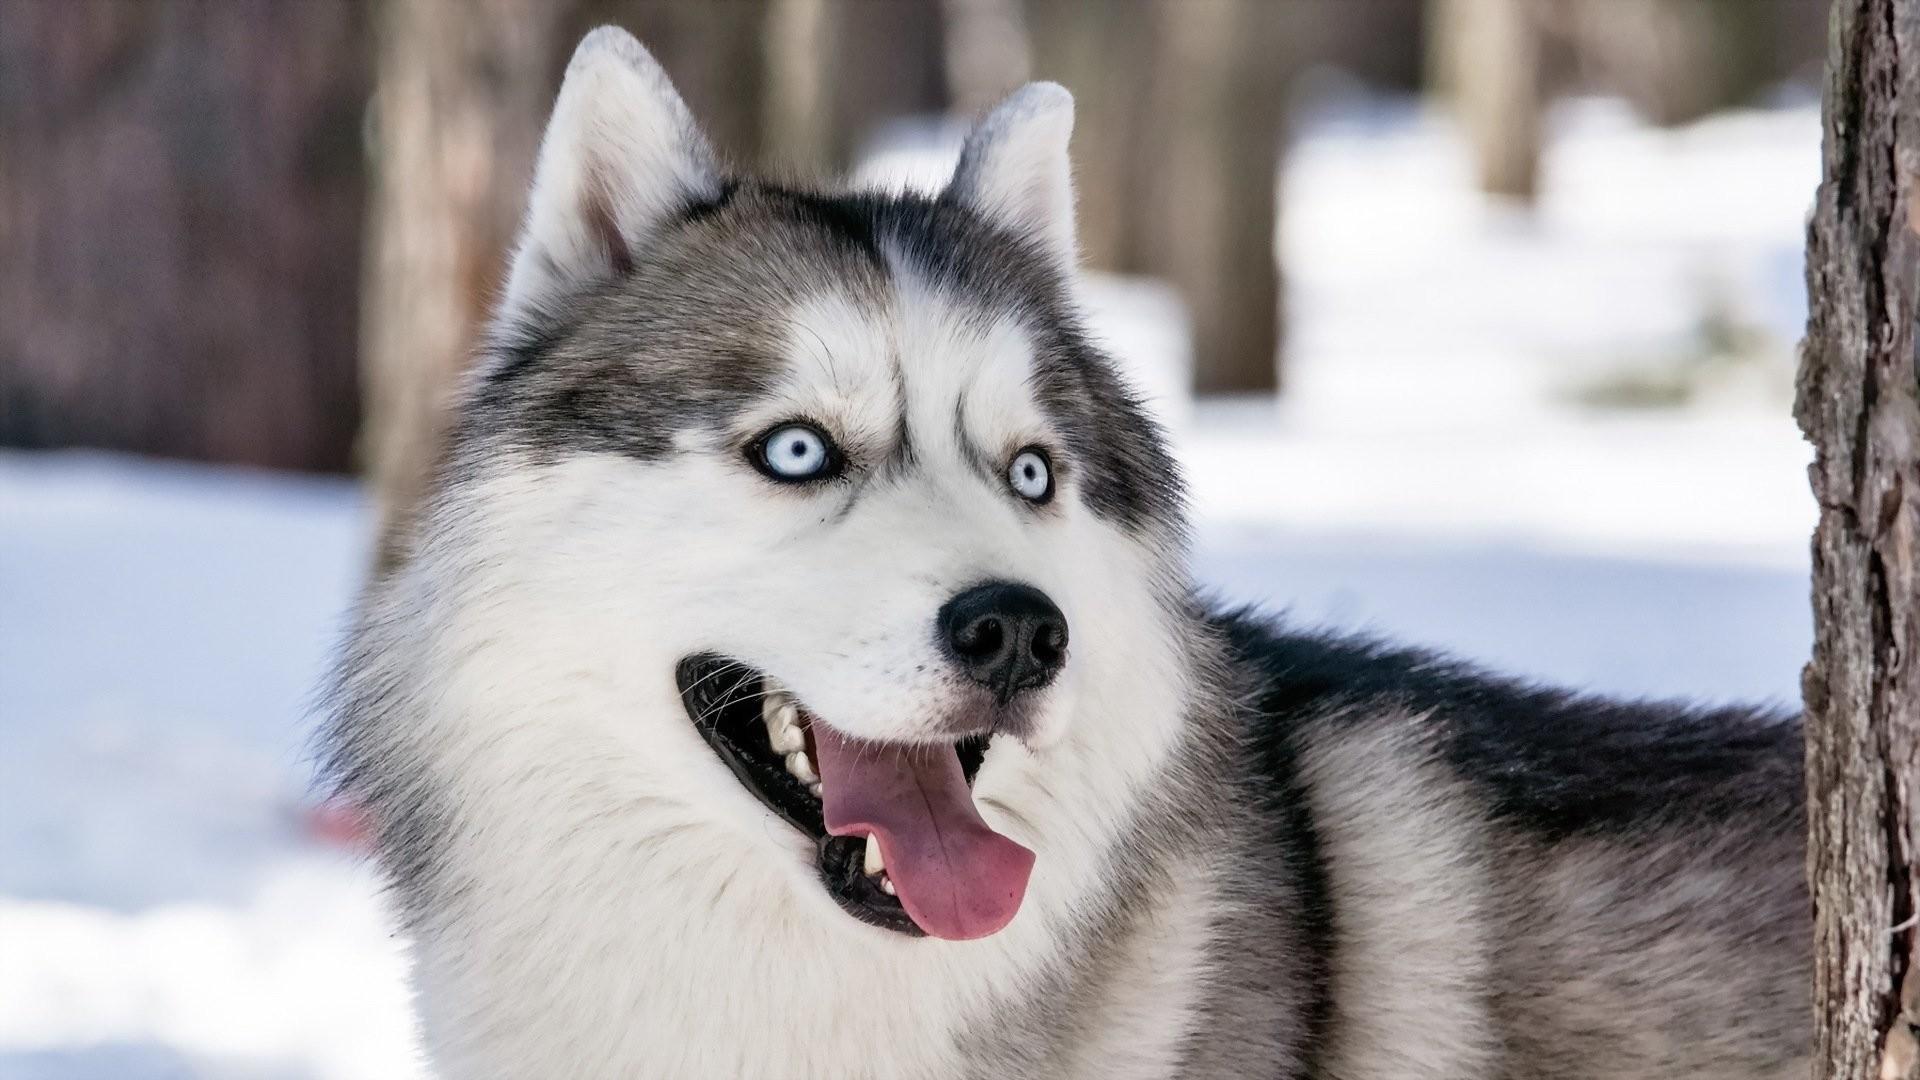 Siberian Husky Wallpaper background picture